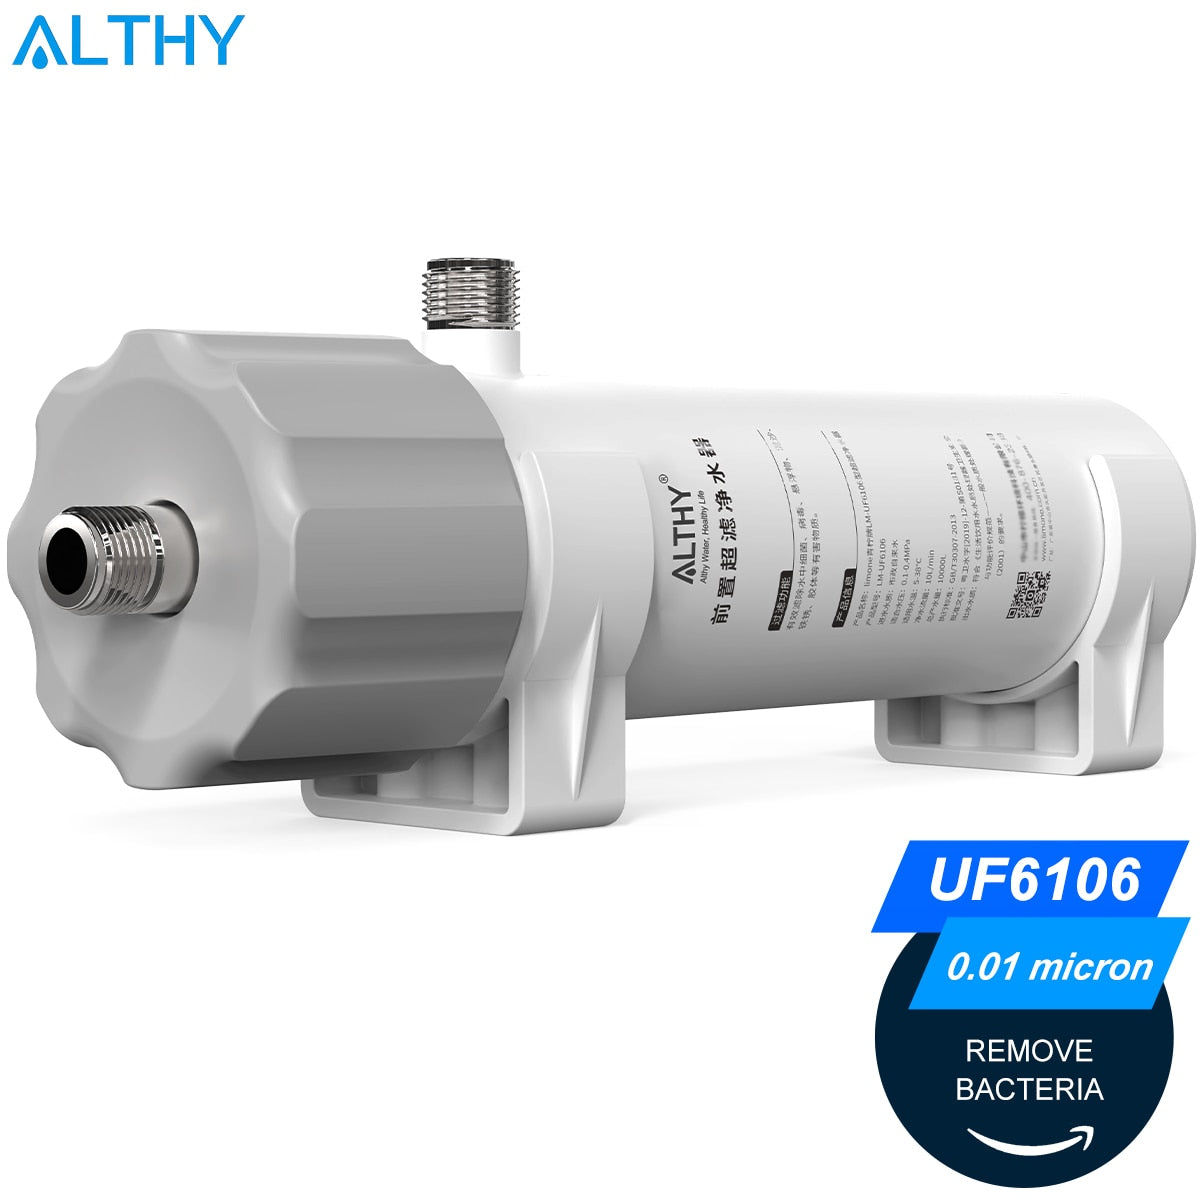 ALTHY 0.01μm PVDF Ultrafiltration Water Filter Purifier System for Bacterial Reduction, Washable UF Membrane,  Drinking Water  Hardware > Plumbing > Water Dispensing & Filtration 209.76 EZYSELLA SHOP